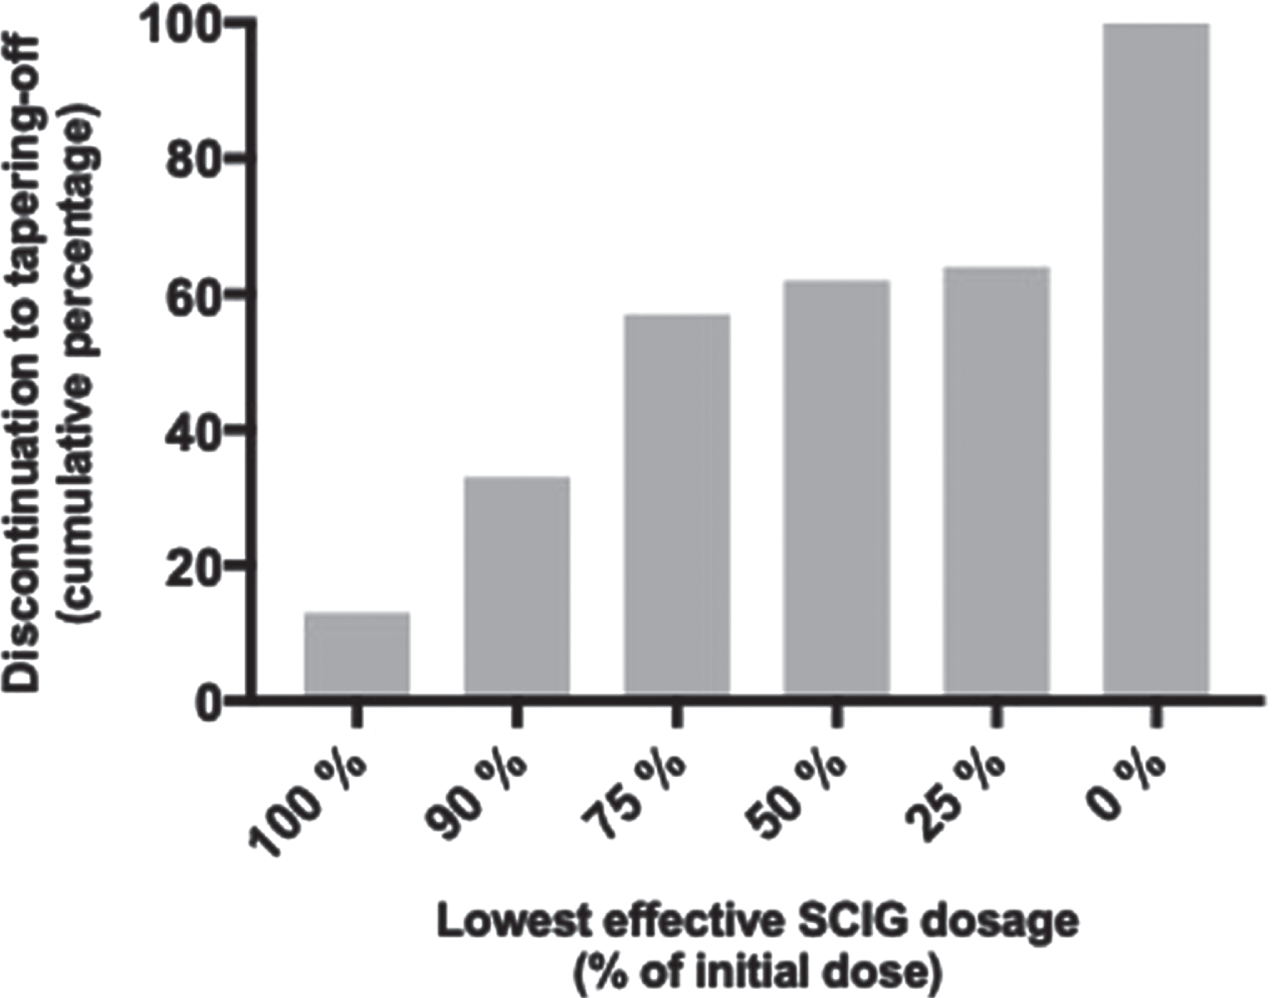 Cumulative percentage of discontinued participants according to the lowest effective dosage of SCIG.